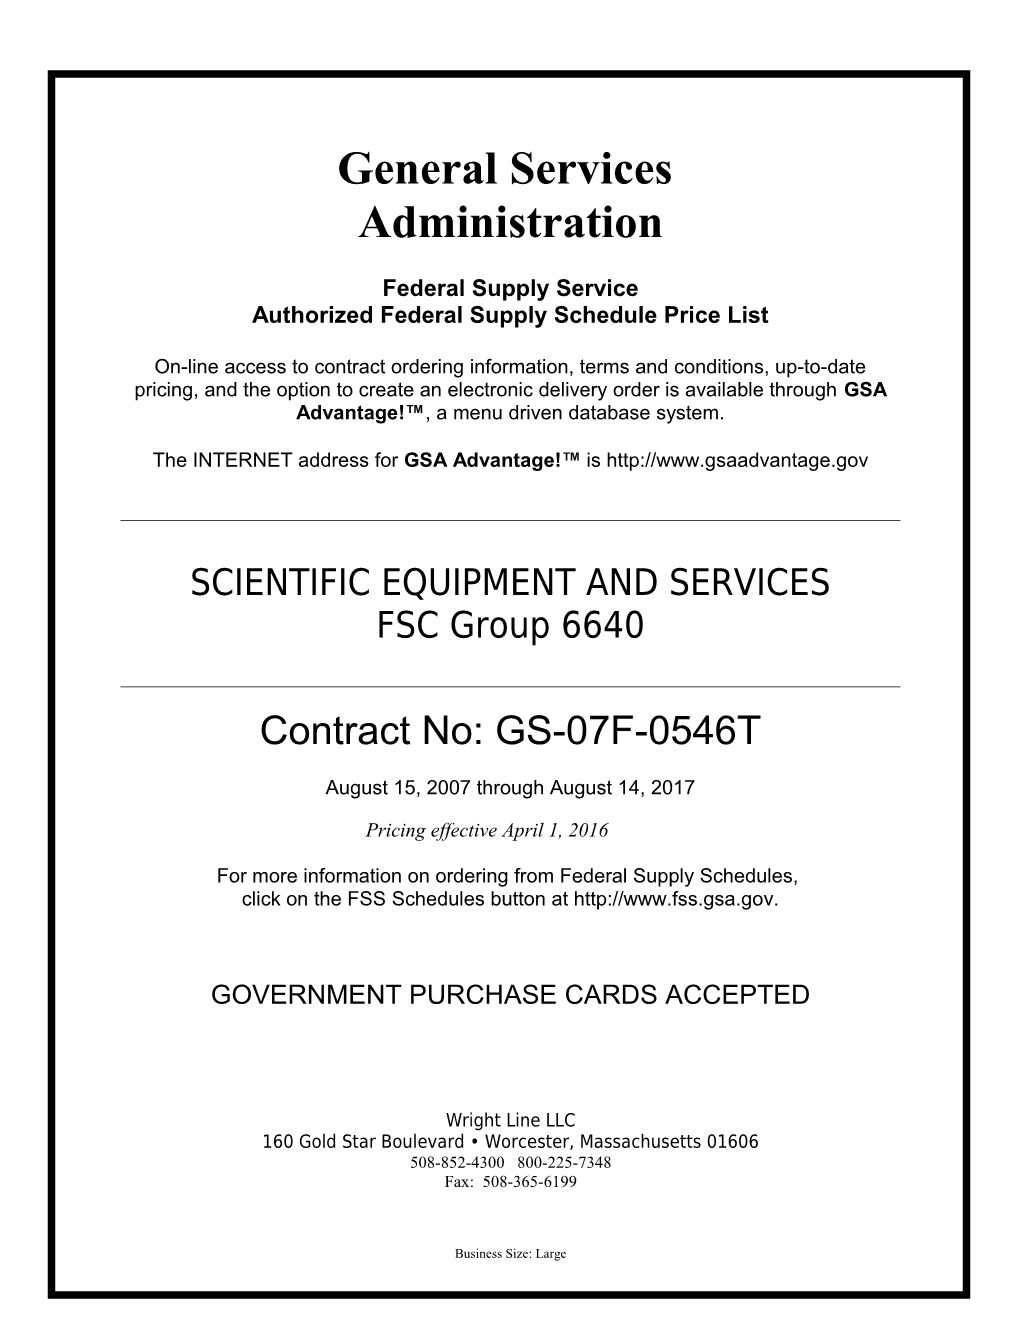 Authorized Federal Supply Schedule Price List s15